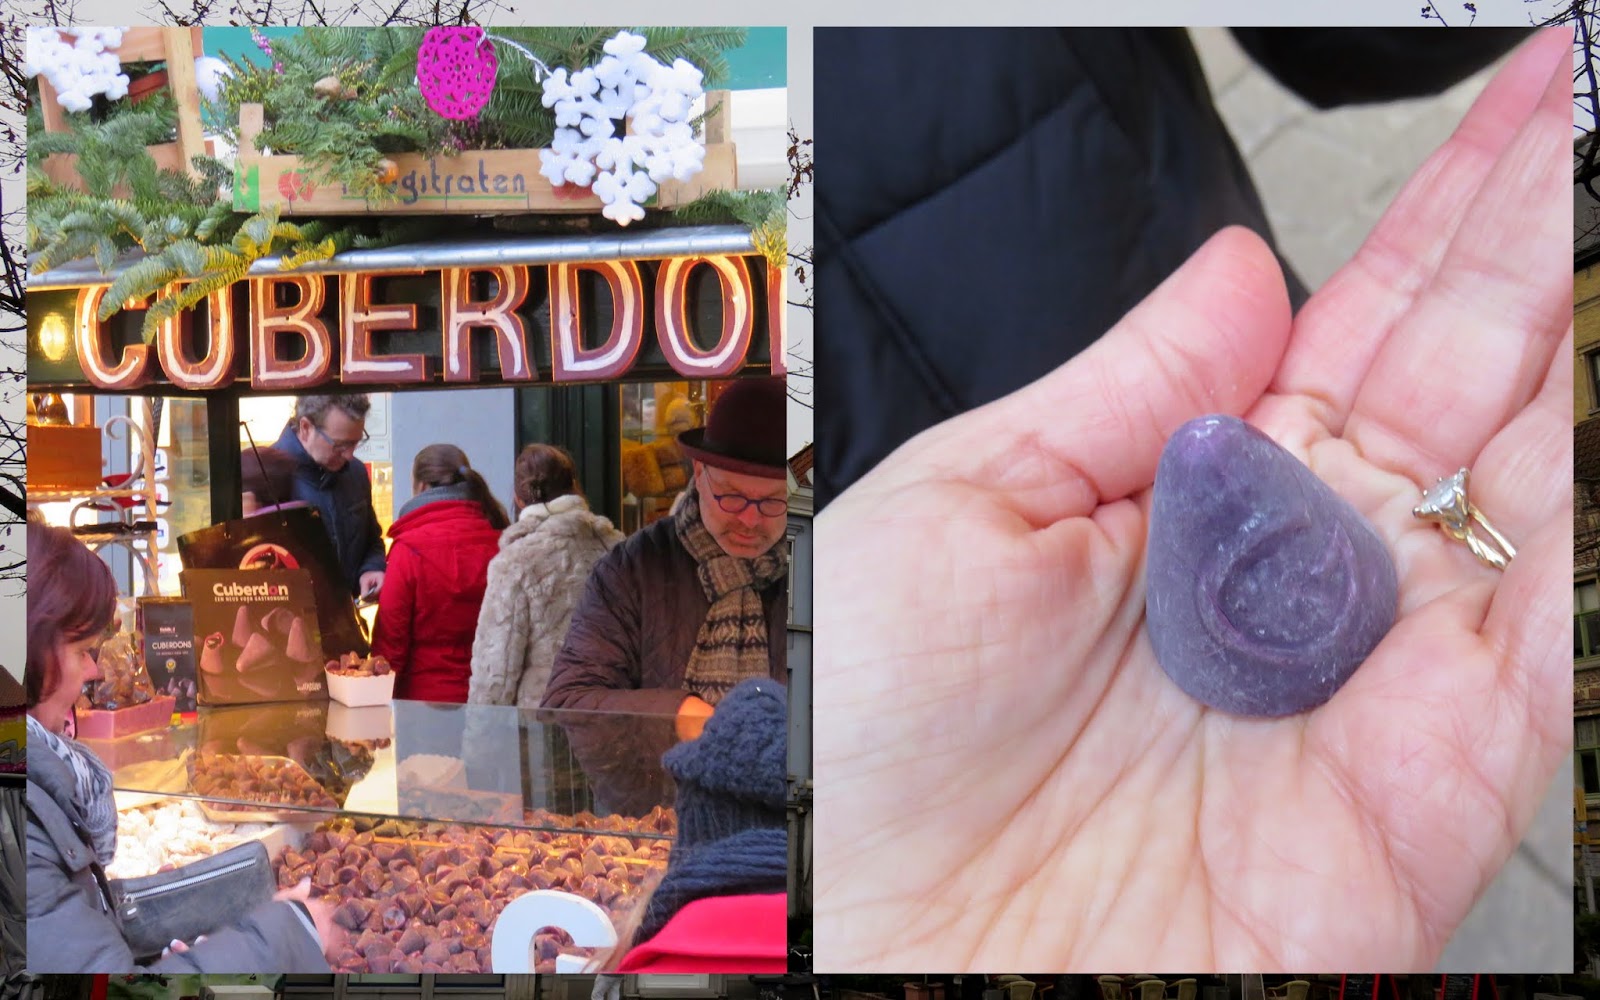 8 Reasons to Visit Belgium for a Christmas: Cuberdon